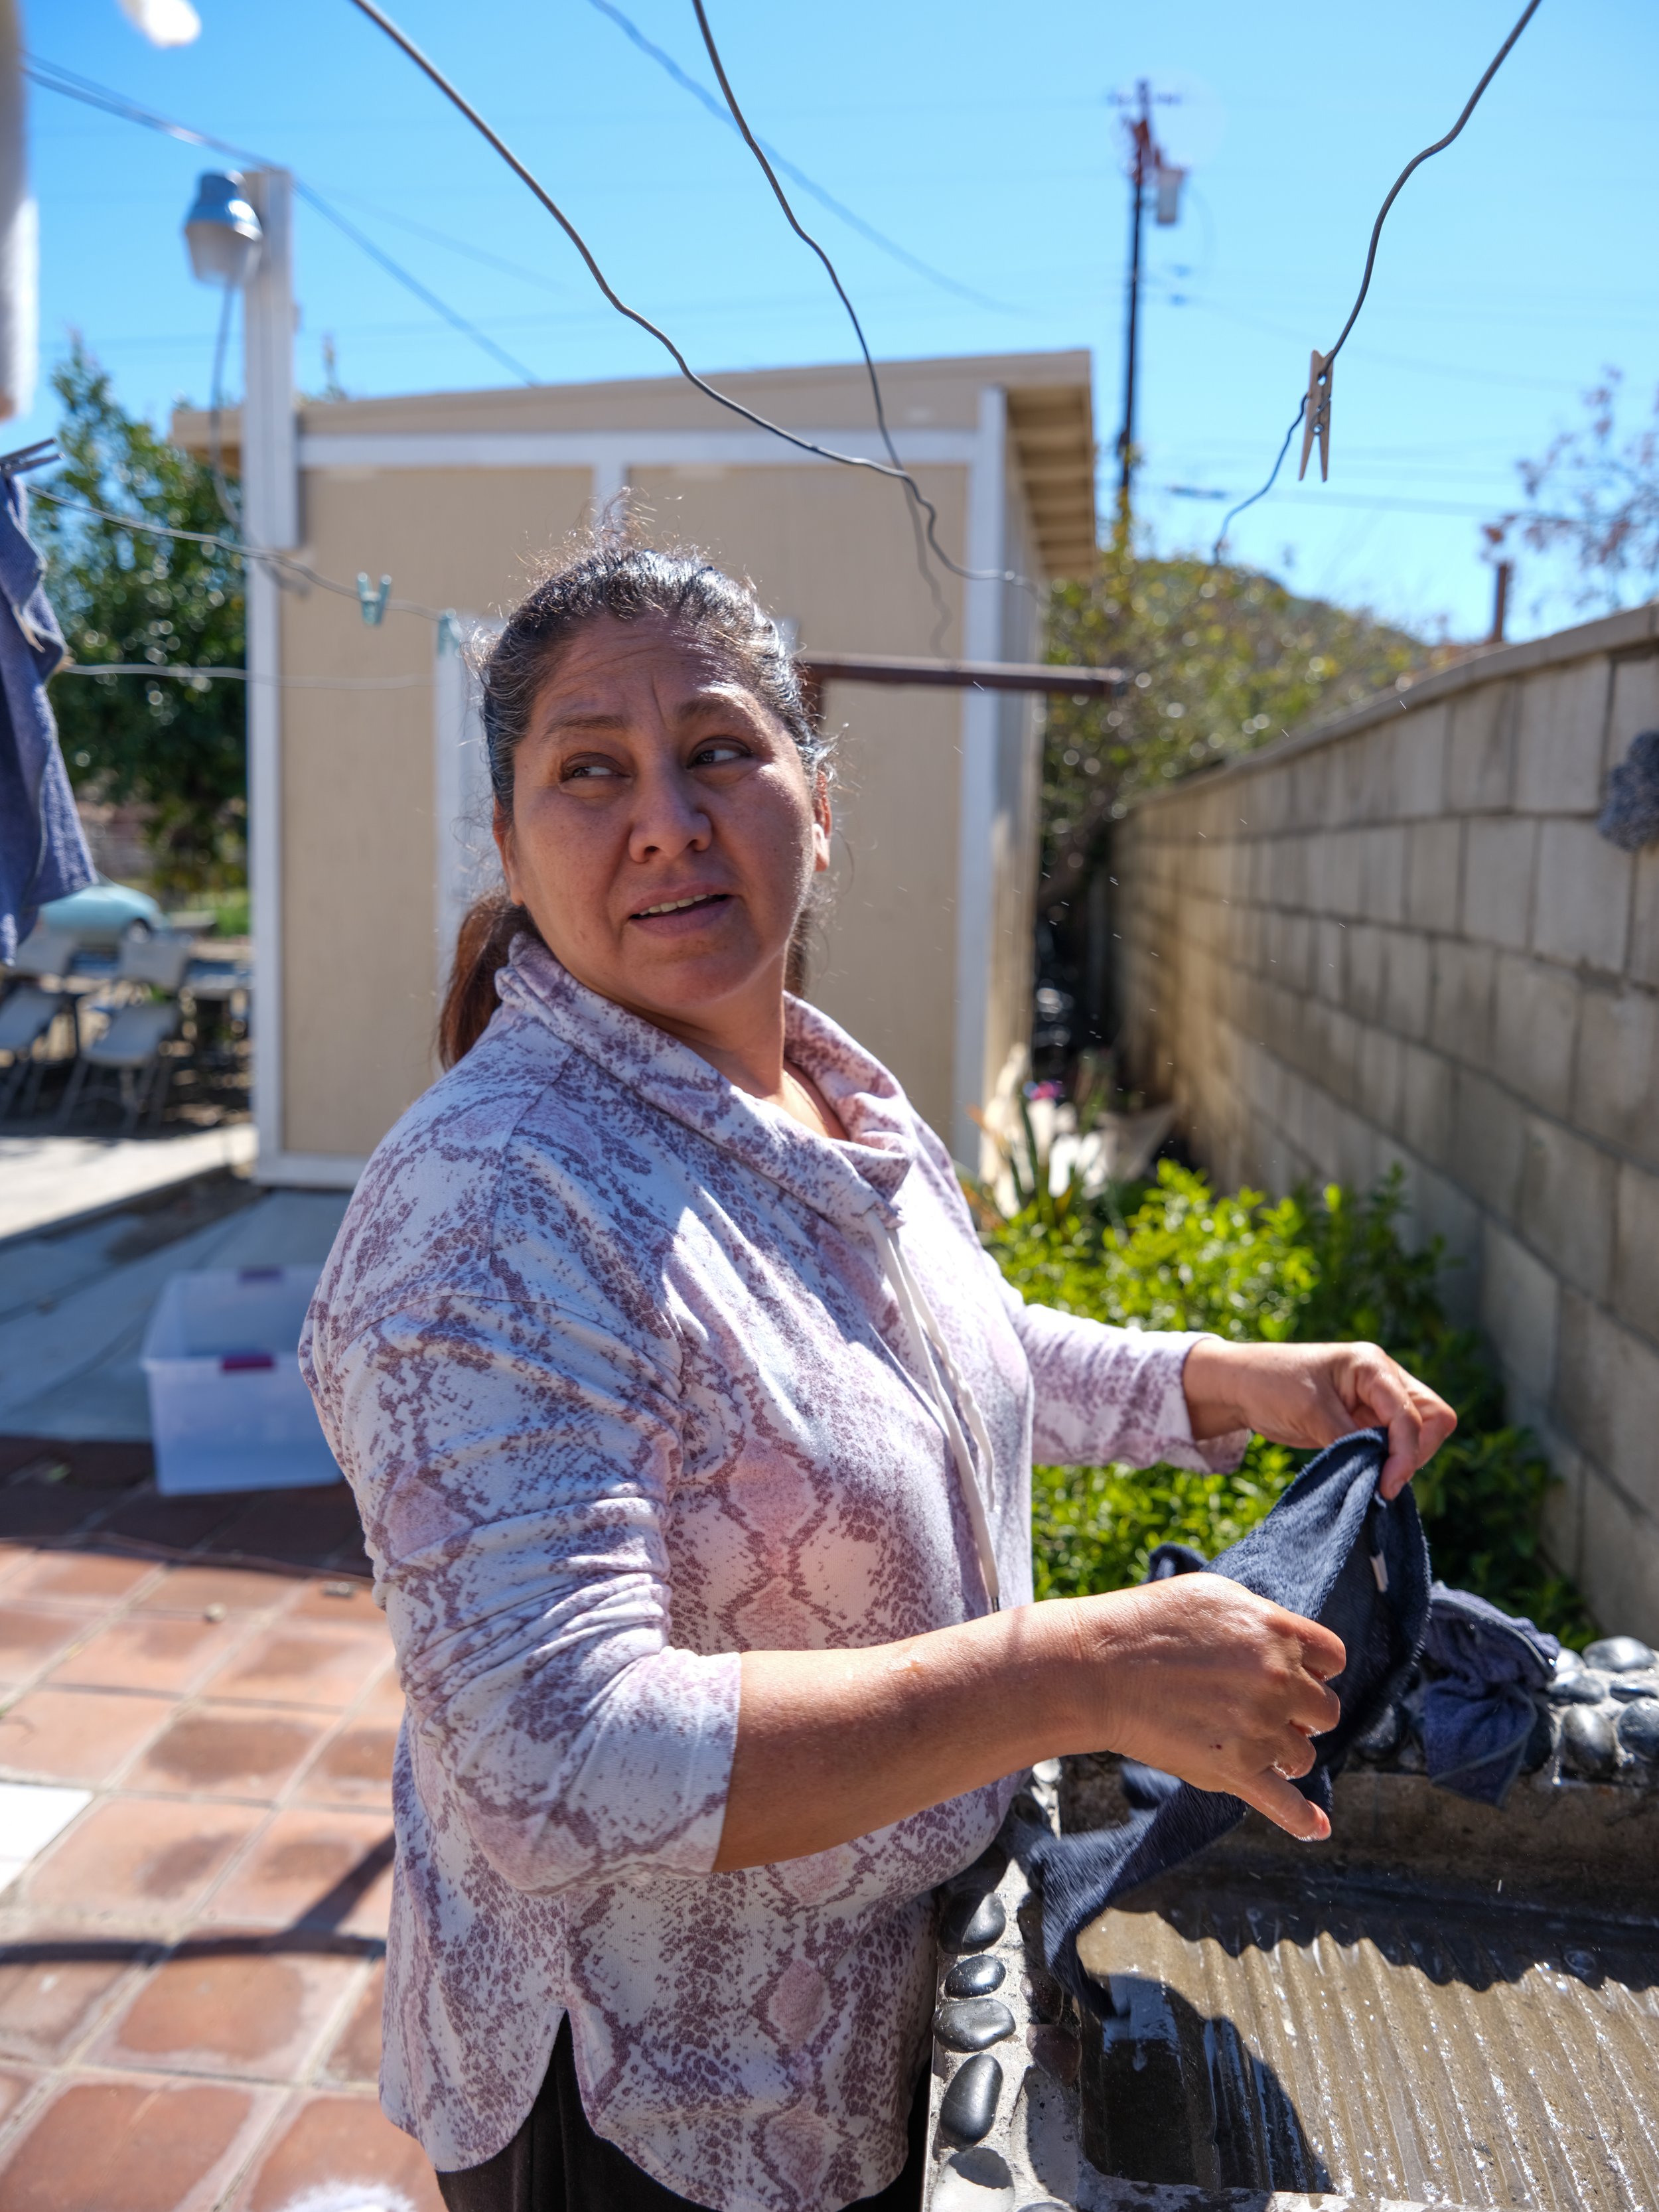  María  washes kitchen rags in a lavadero in her backyard on March 2, 2023. She said the lavadero and her yard among other things in the family home remind her of her home in Chiapas, Mexico. Years ago, her family moved from Los Angeles to Bloomingto